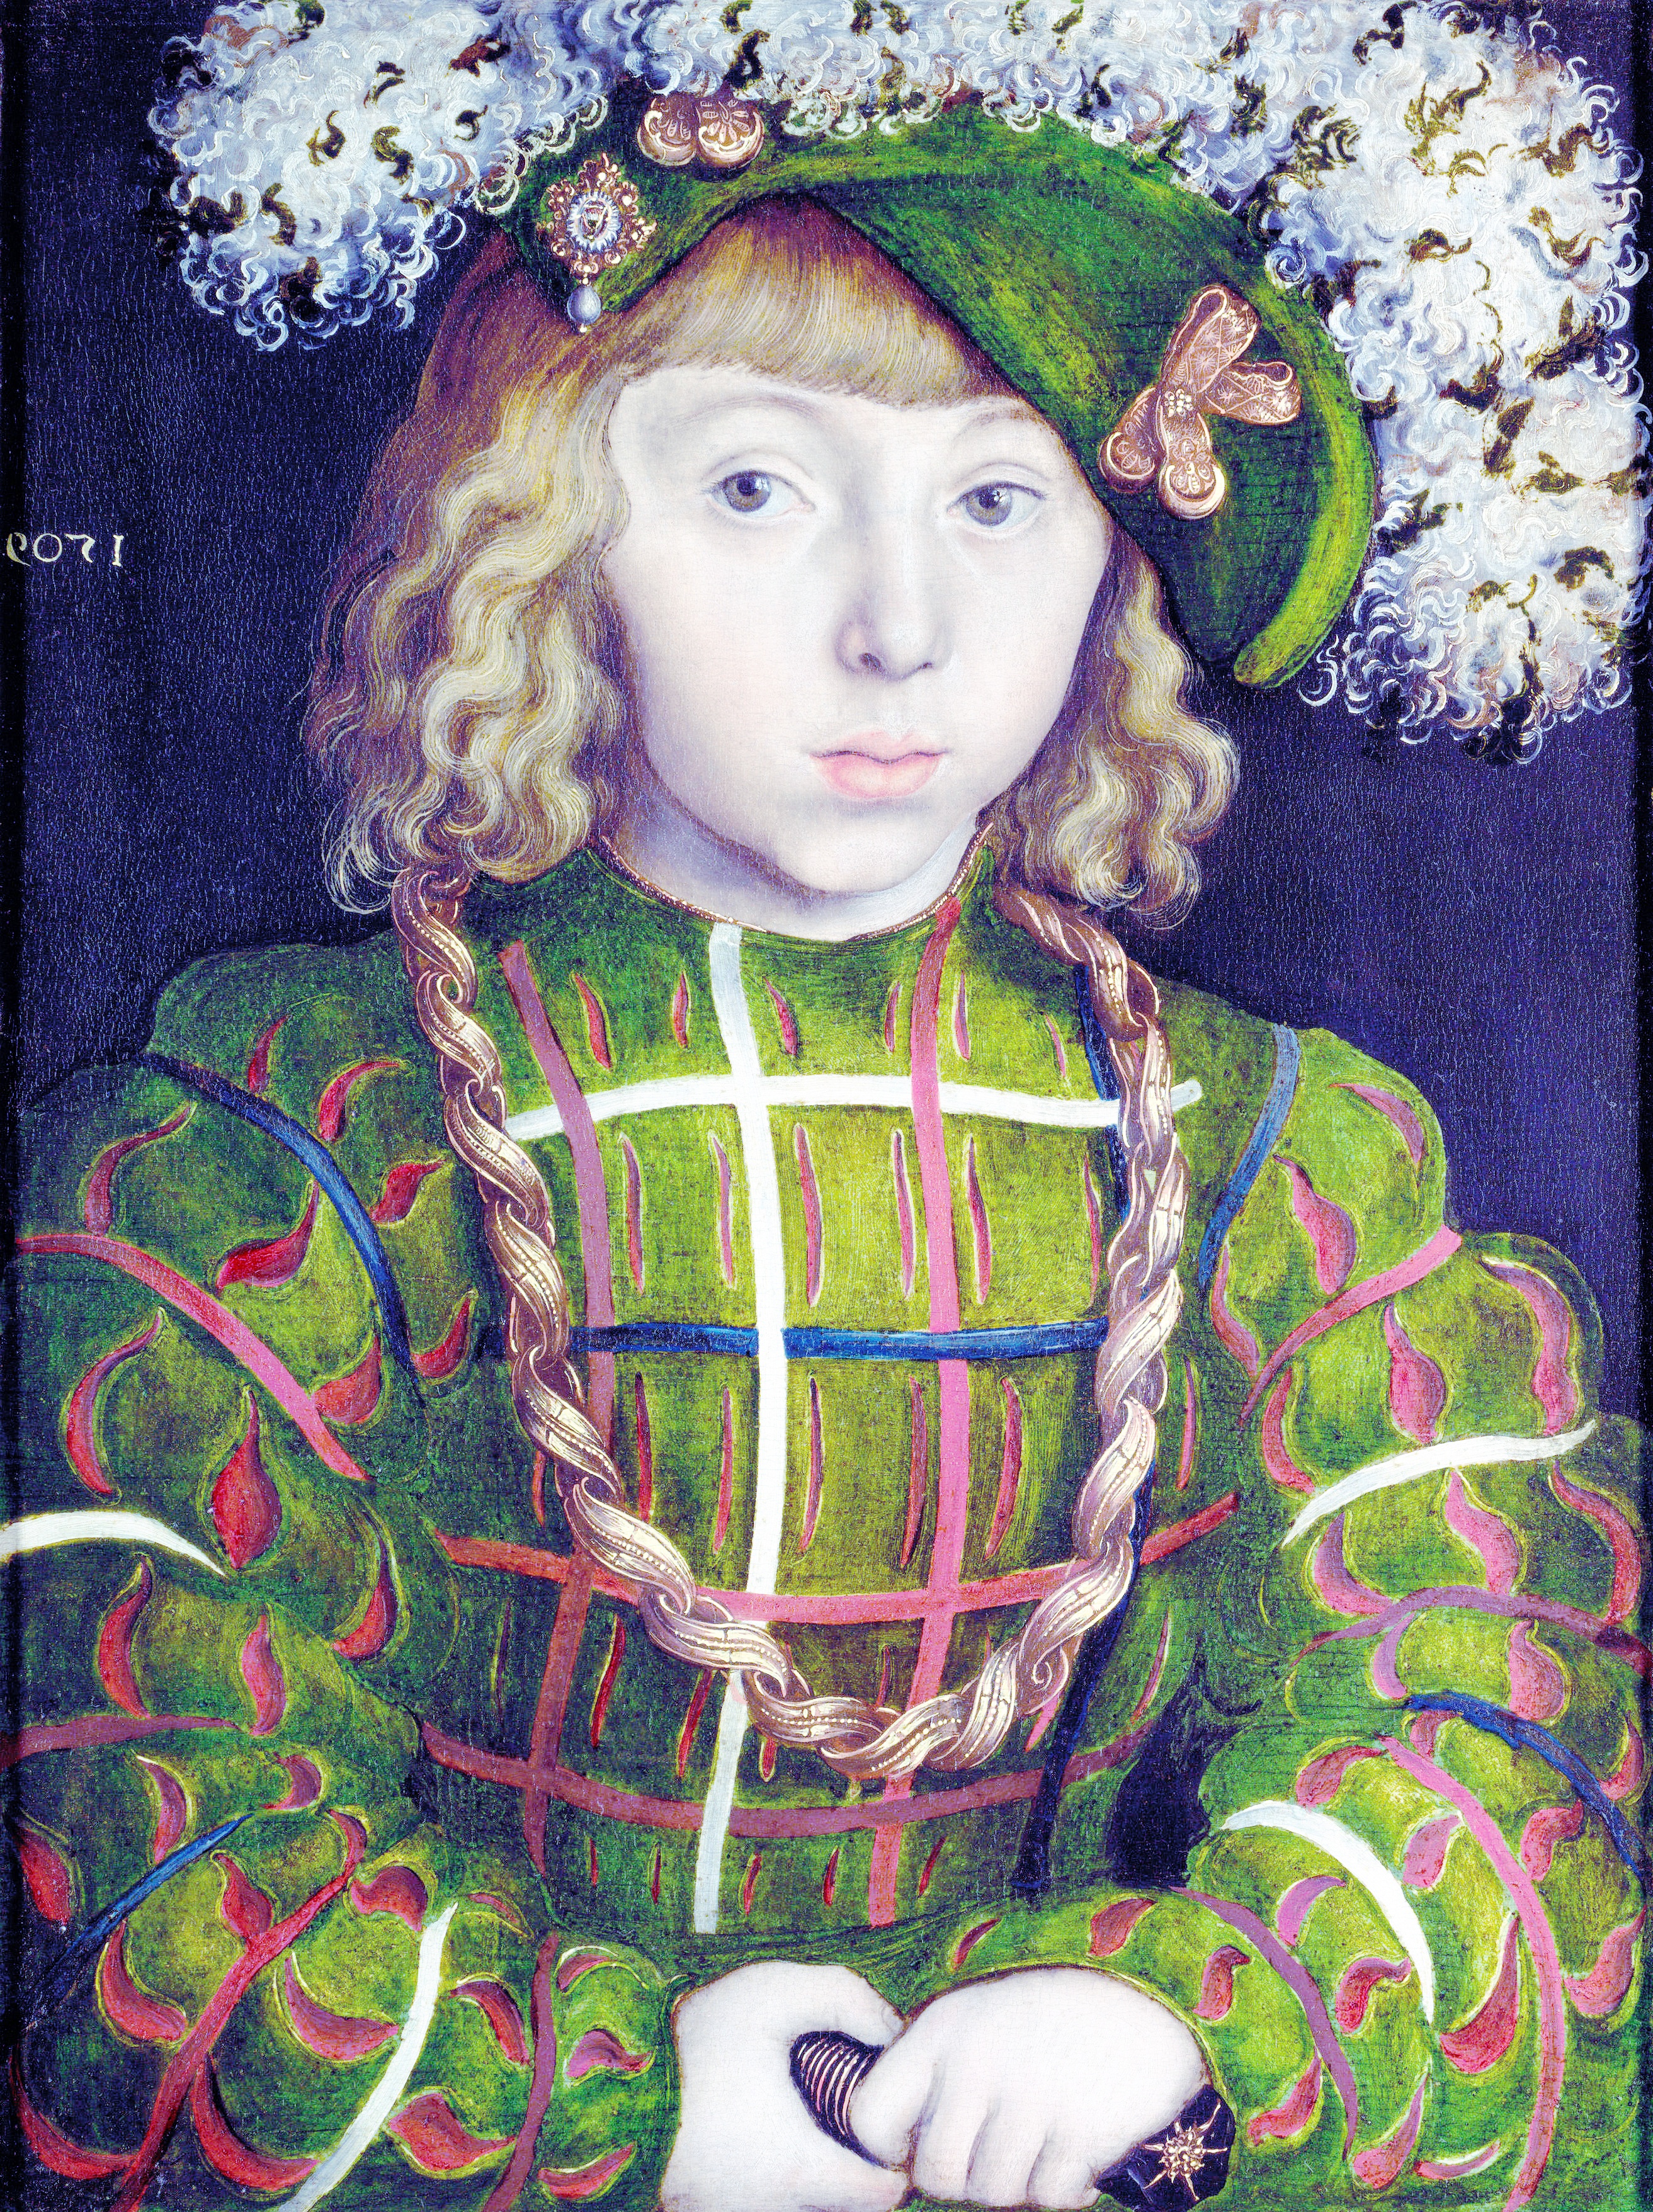 a Thessara Eldusaer painting of a child in a green dress and hat